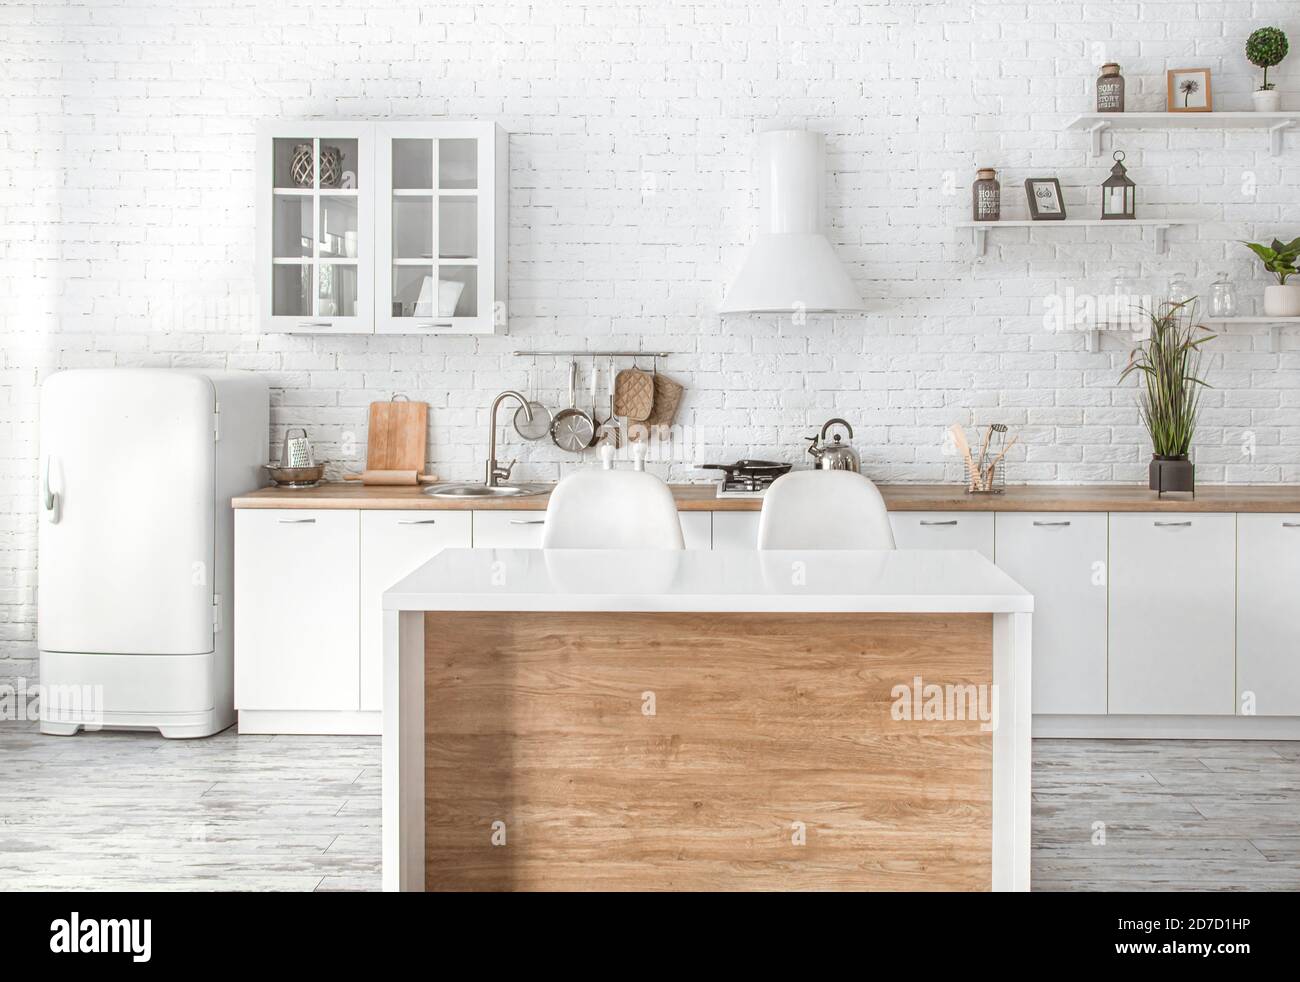 https://c8.alamy.com/comp/2D7D1HP/modern-stylish-scandinavian-kitchen-interior-with-kitchen-accessories-bright-white-kitchen-with-household-items-2D7D1HP.jpg